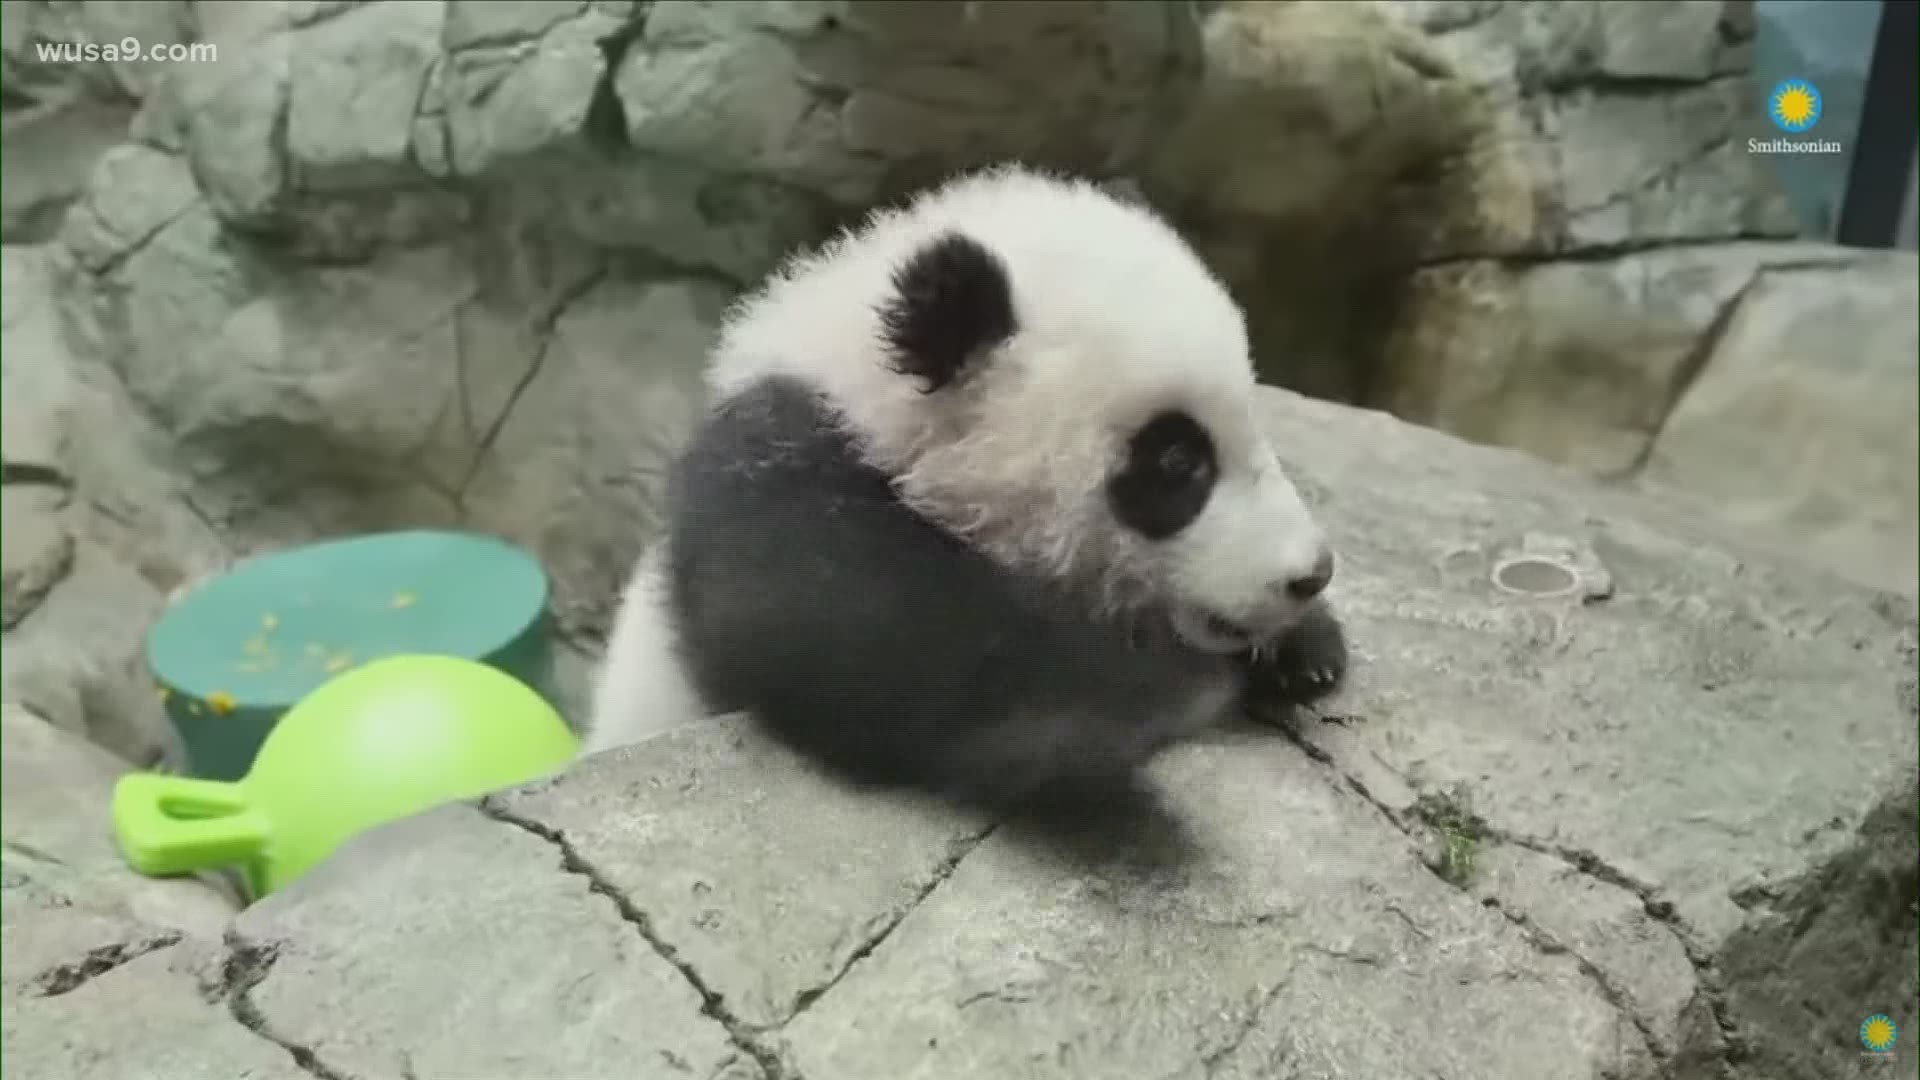 National Zoo S Baby Panda Goes Live For First Virtual Meet And Greet Wusa9 Com